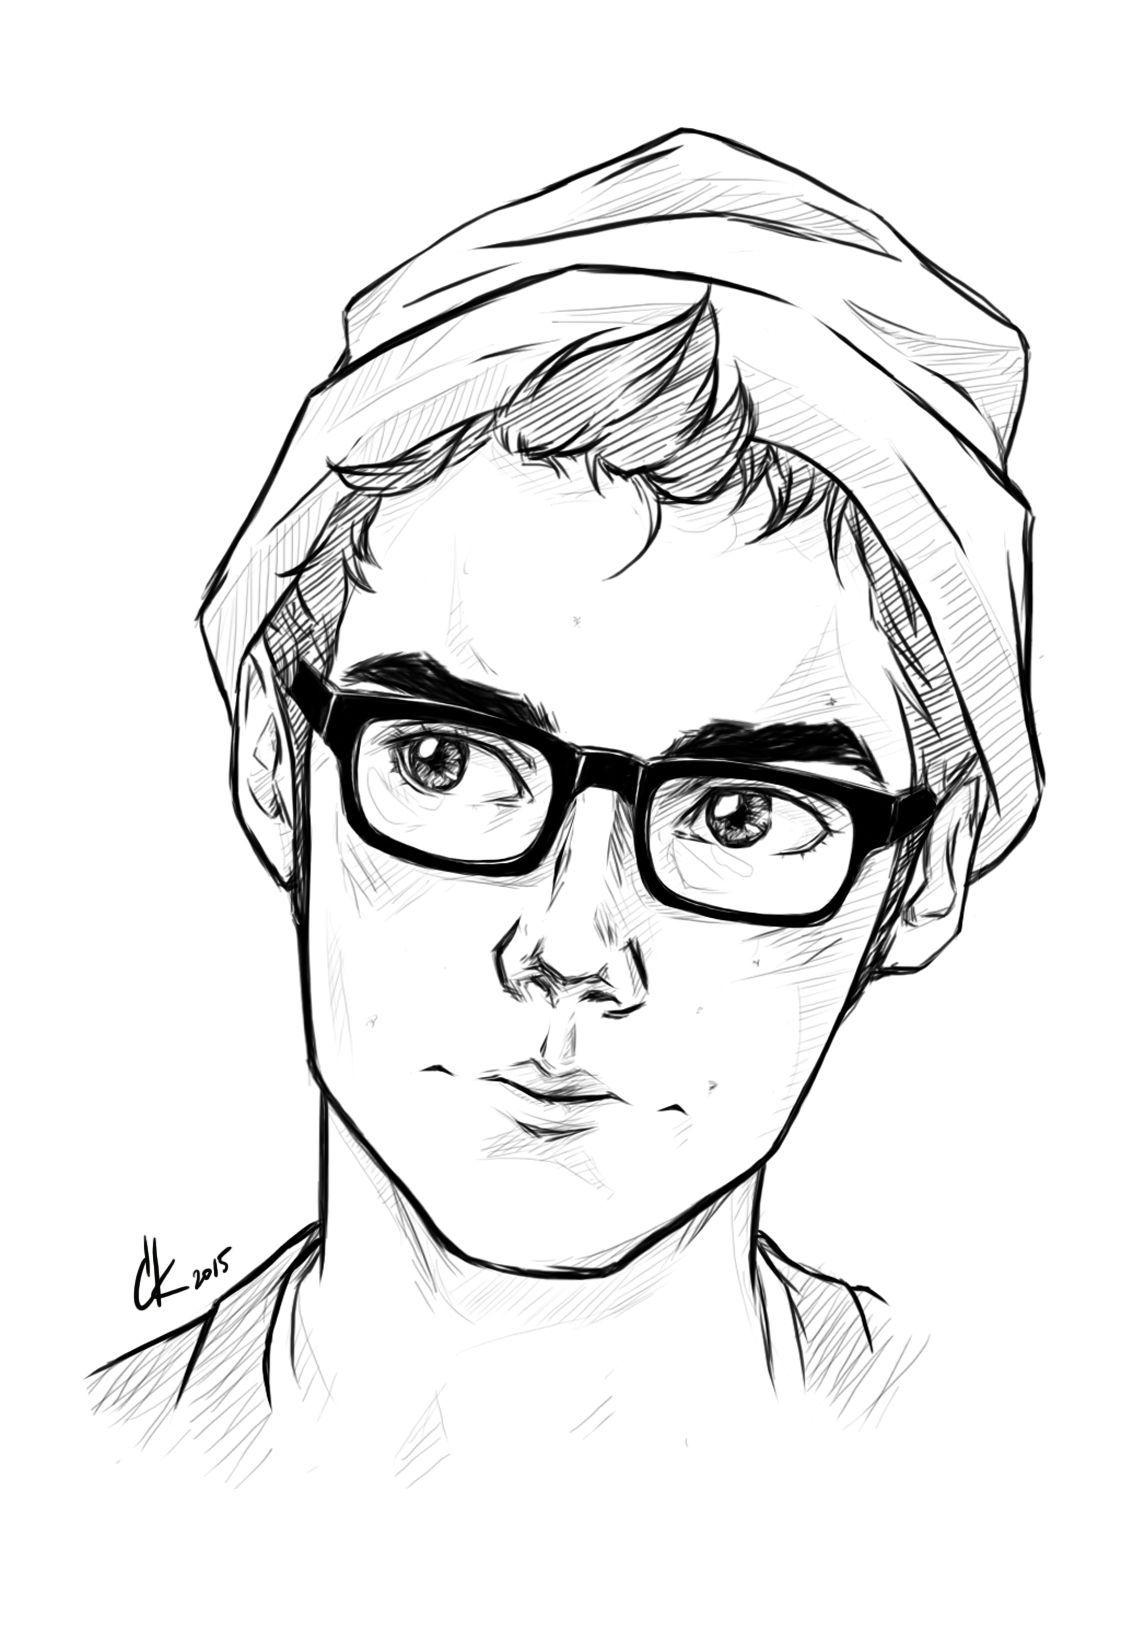 Discover 143+ cool sketches for boys latest